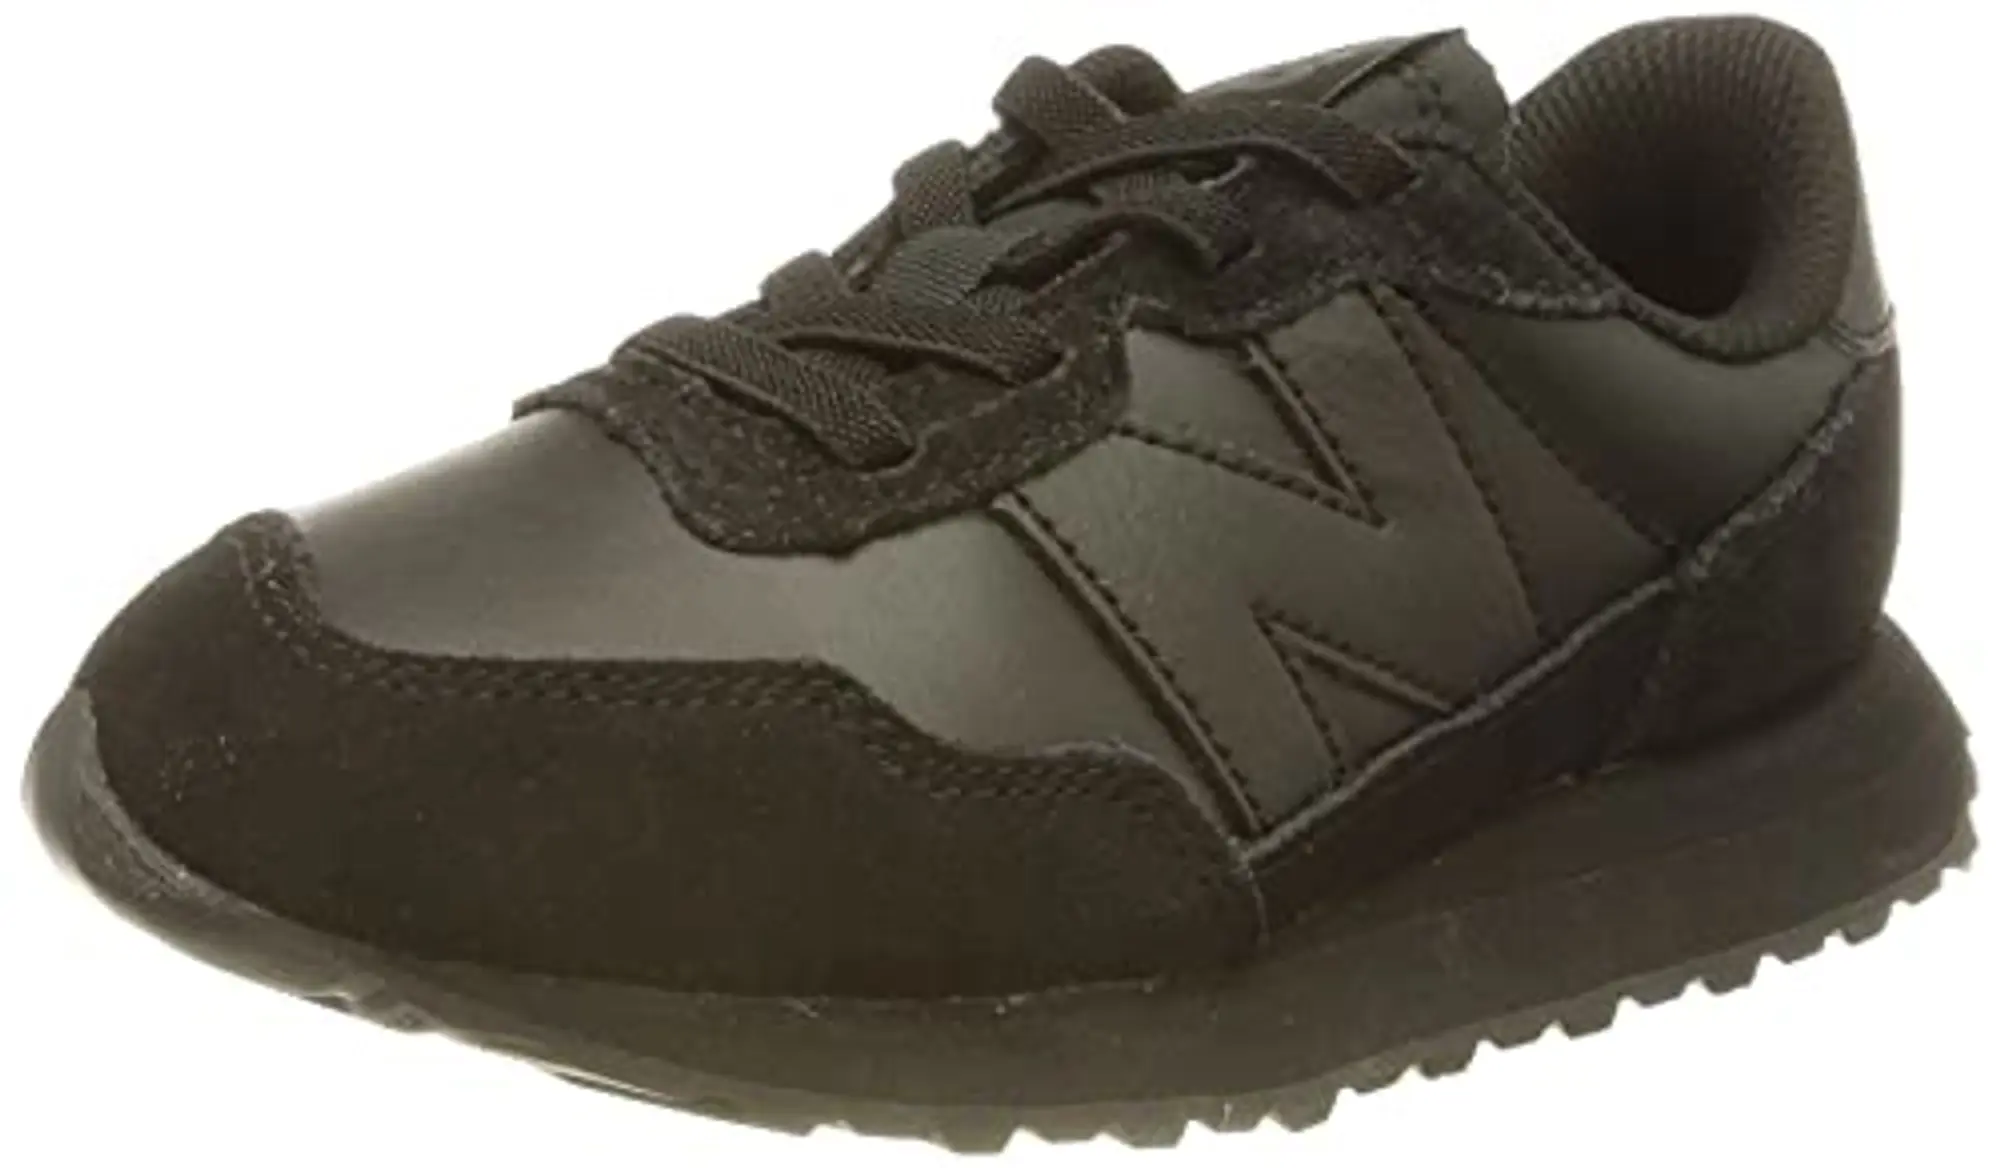 New Balance Kids' 237 Bungee in Black Leather